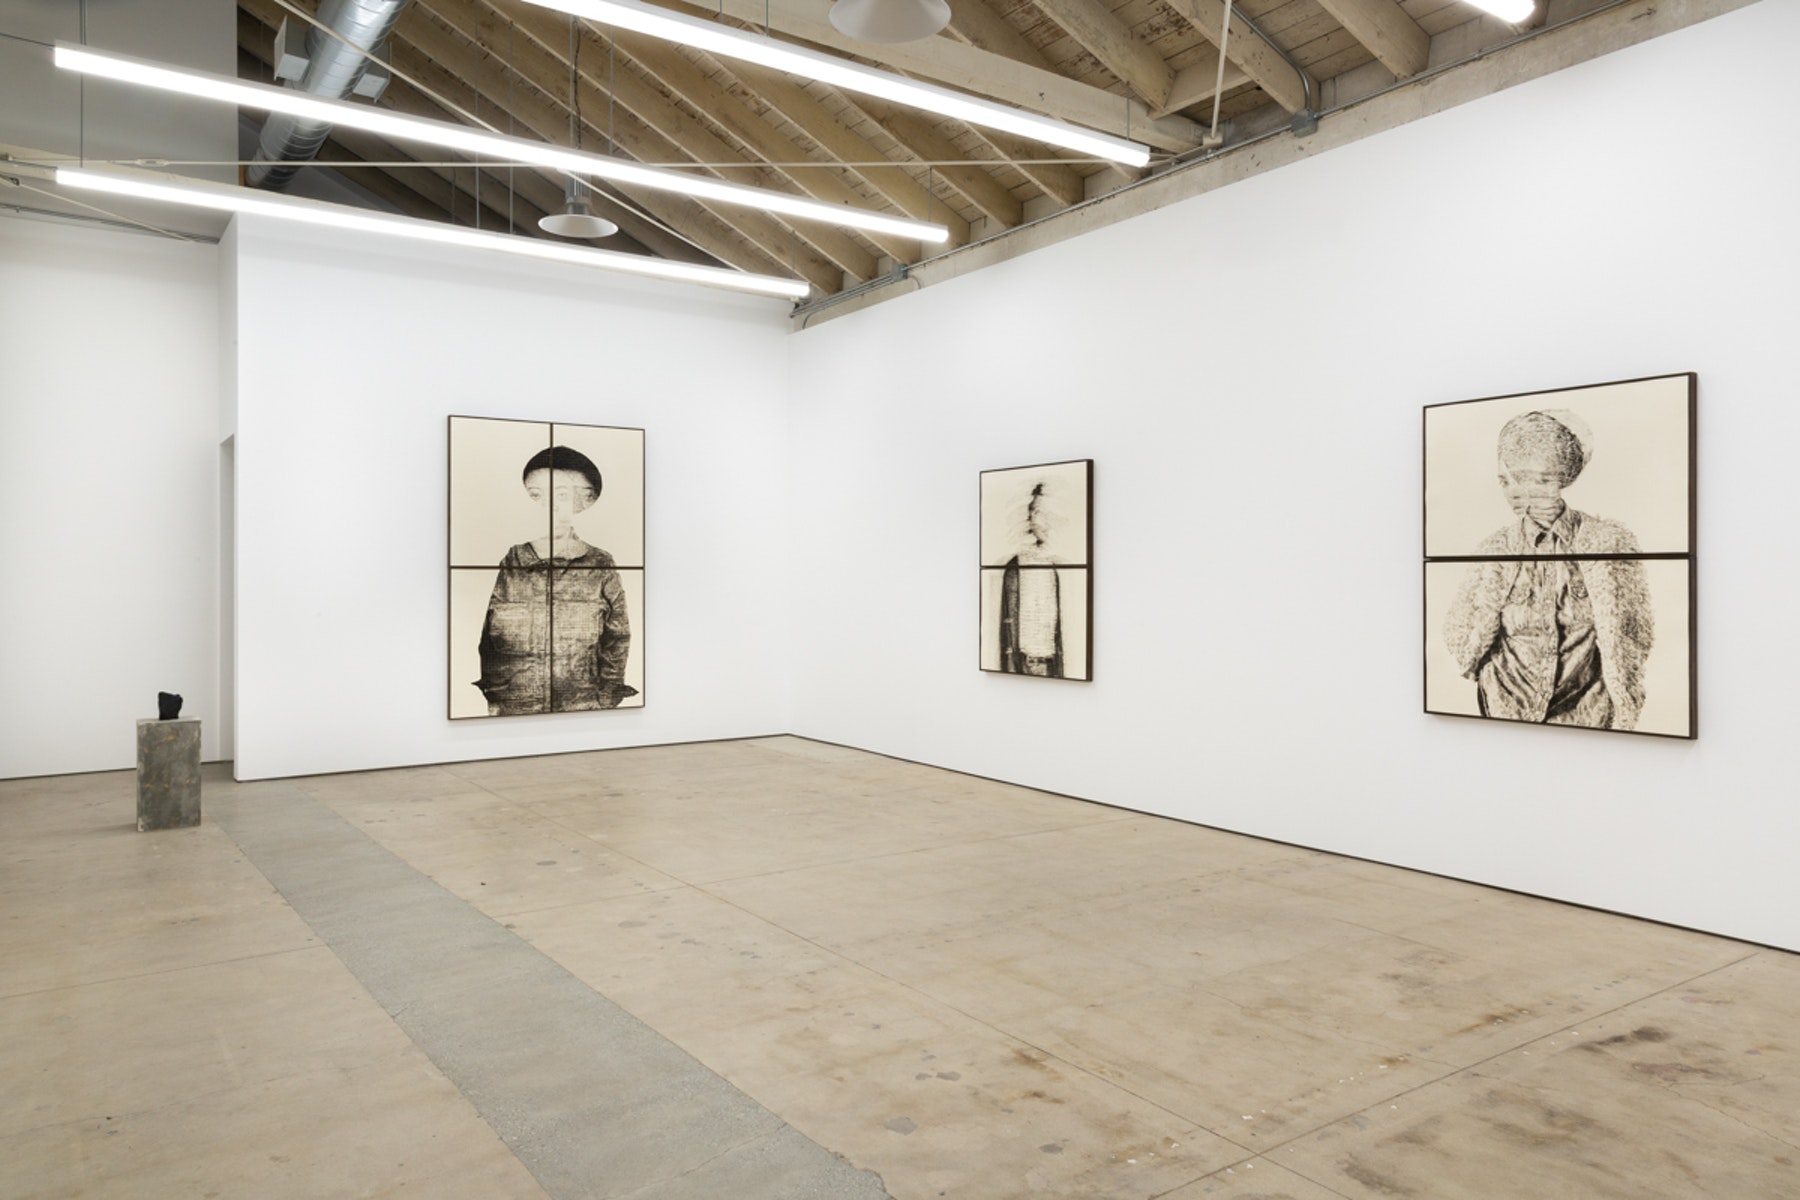 Installation view of Blur in the Interest of Precision by Kenturah Davis at Matthew Brown, Los Angeles. 26 January - 2 March 2019. Courtesy of the Artist and Matthew Brown, Los Angeles.